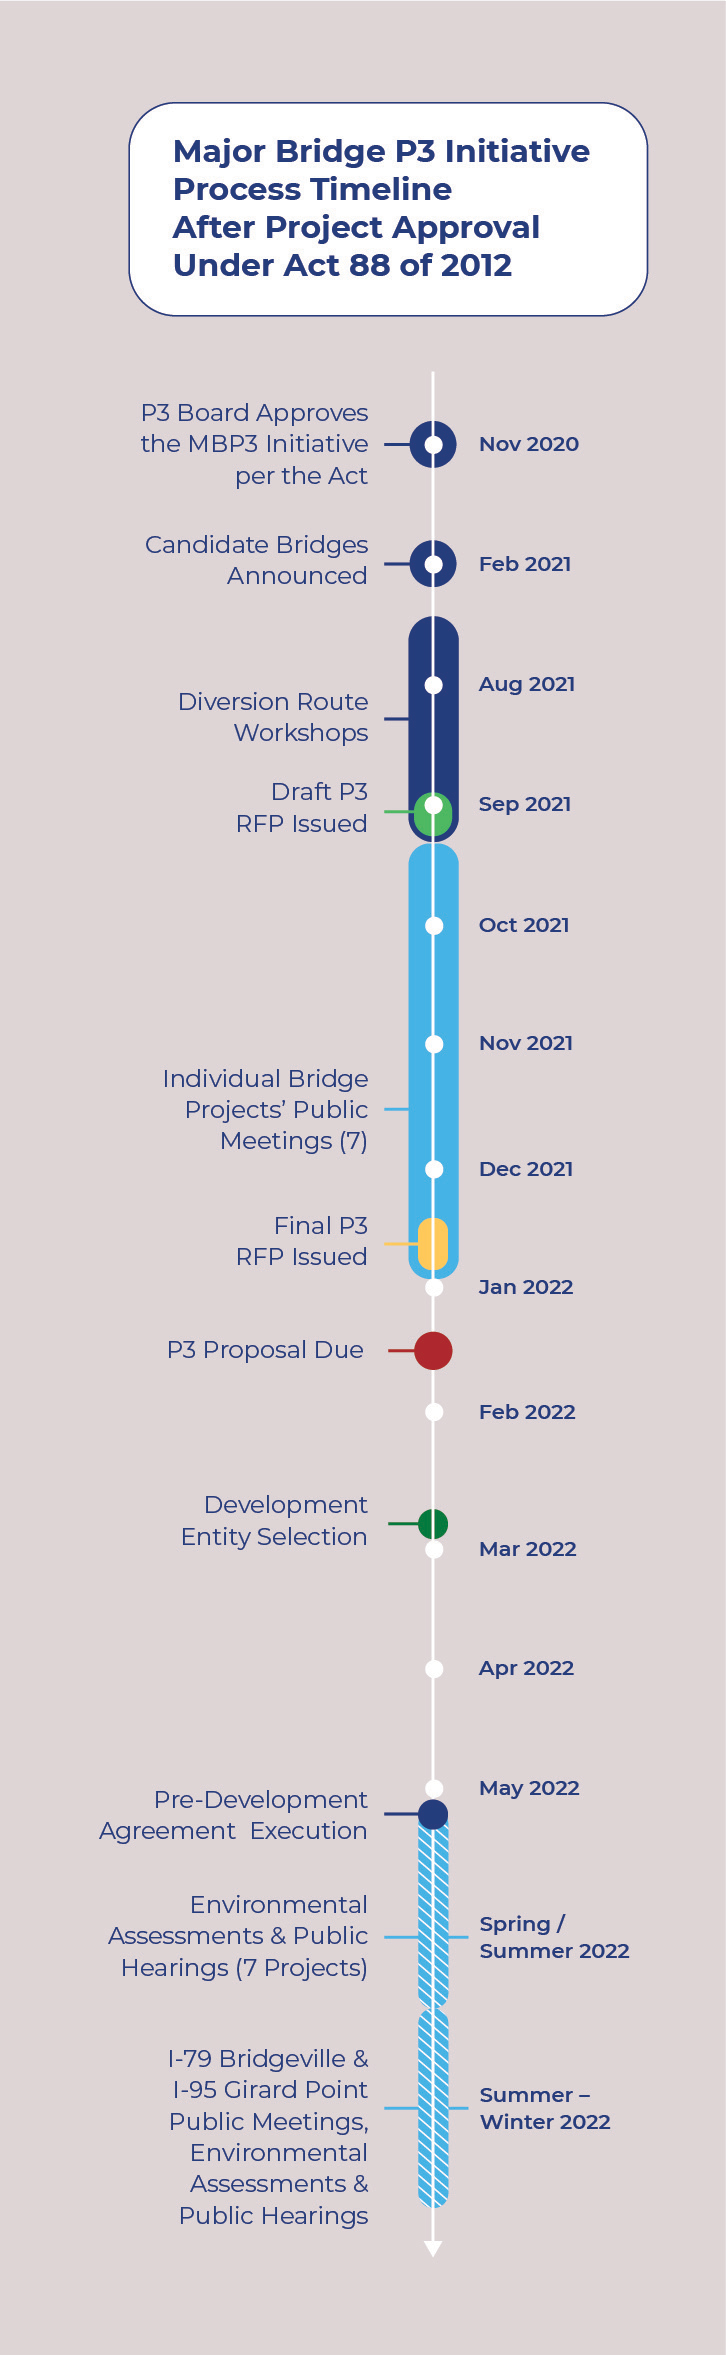 Timeline of Major Bridge P3 process. The P3 request for qualifications was issued in July 2021. Diversion route workshops were  held August to mid-September 2021. The draft P3 request for proposals was issued in September 2021. Individual bridge projects' public meetings were held October 2021-January 2022. A final P3 RFP was issued in mid-December 2021. P3 proposals were due in mid-January. The seletion of a development entity is planned for the end of February 2022. A predevelopment agreement (PDF) commercial close is planned for end of March 2022. A public hearing for I-83 South Bridge, as well as public meetings for I-79 Bridgeville and I-95 Girard Point are planned for the spring/summer of 2022.